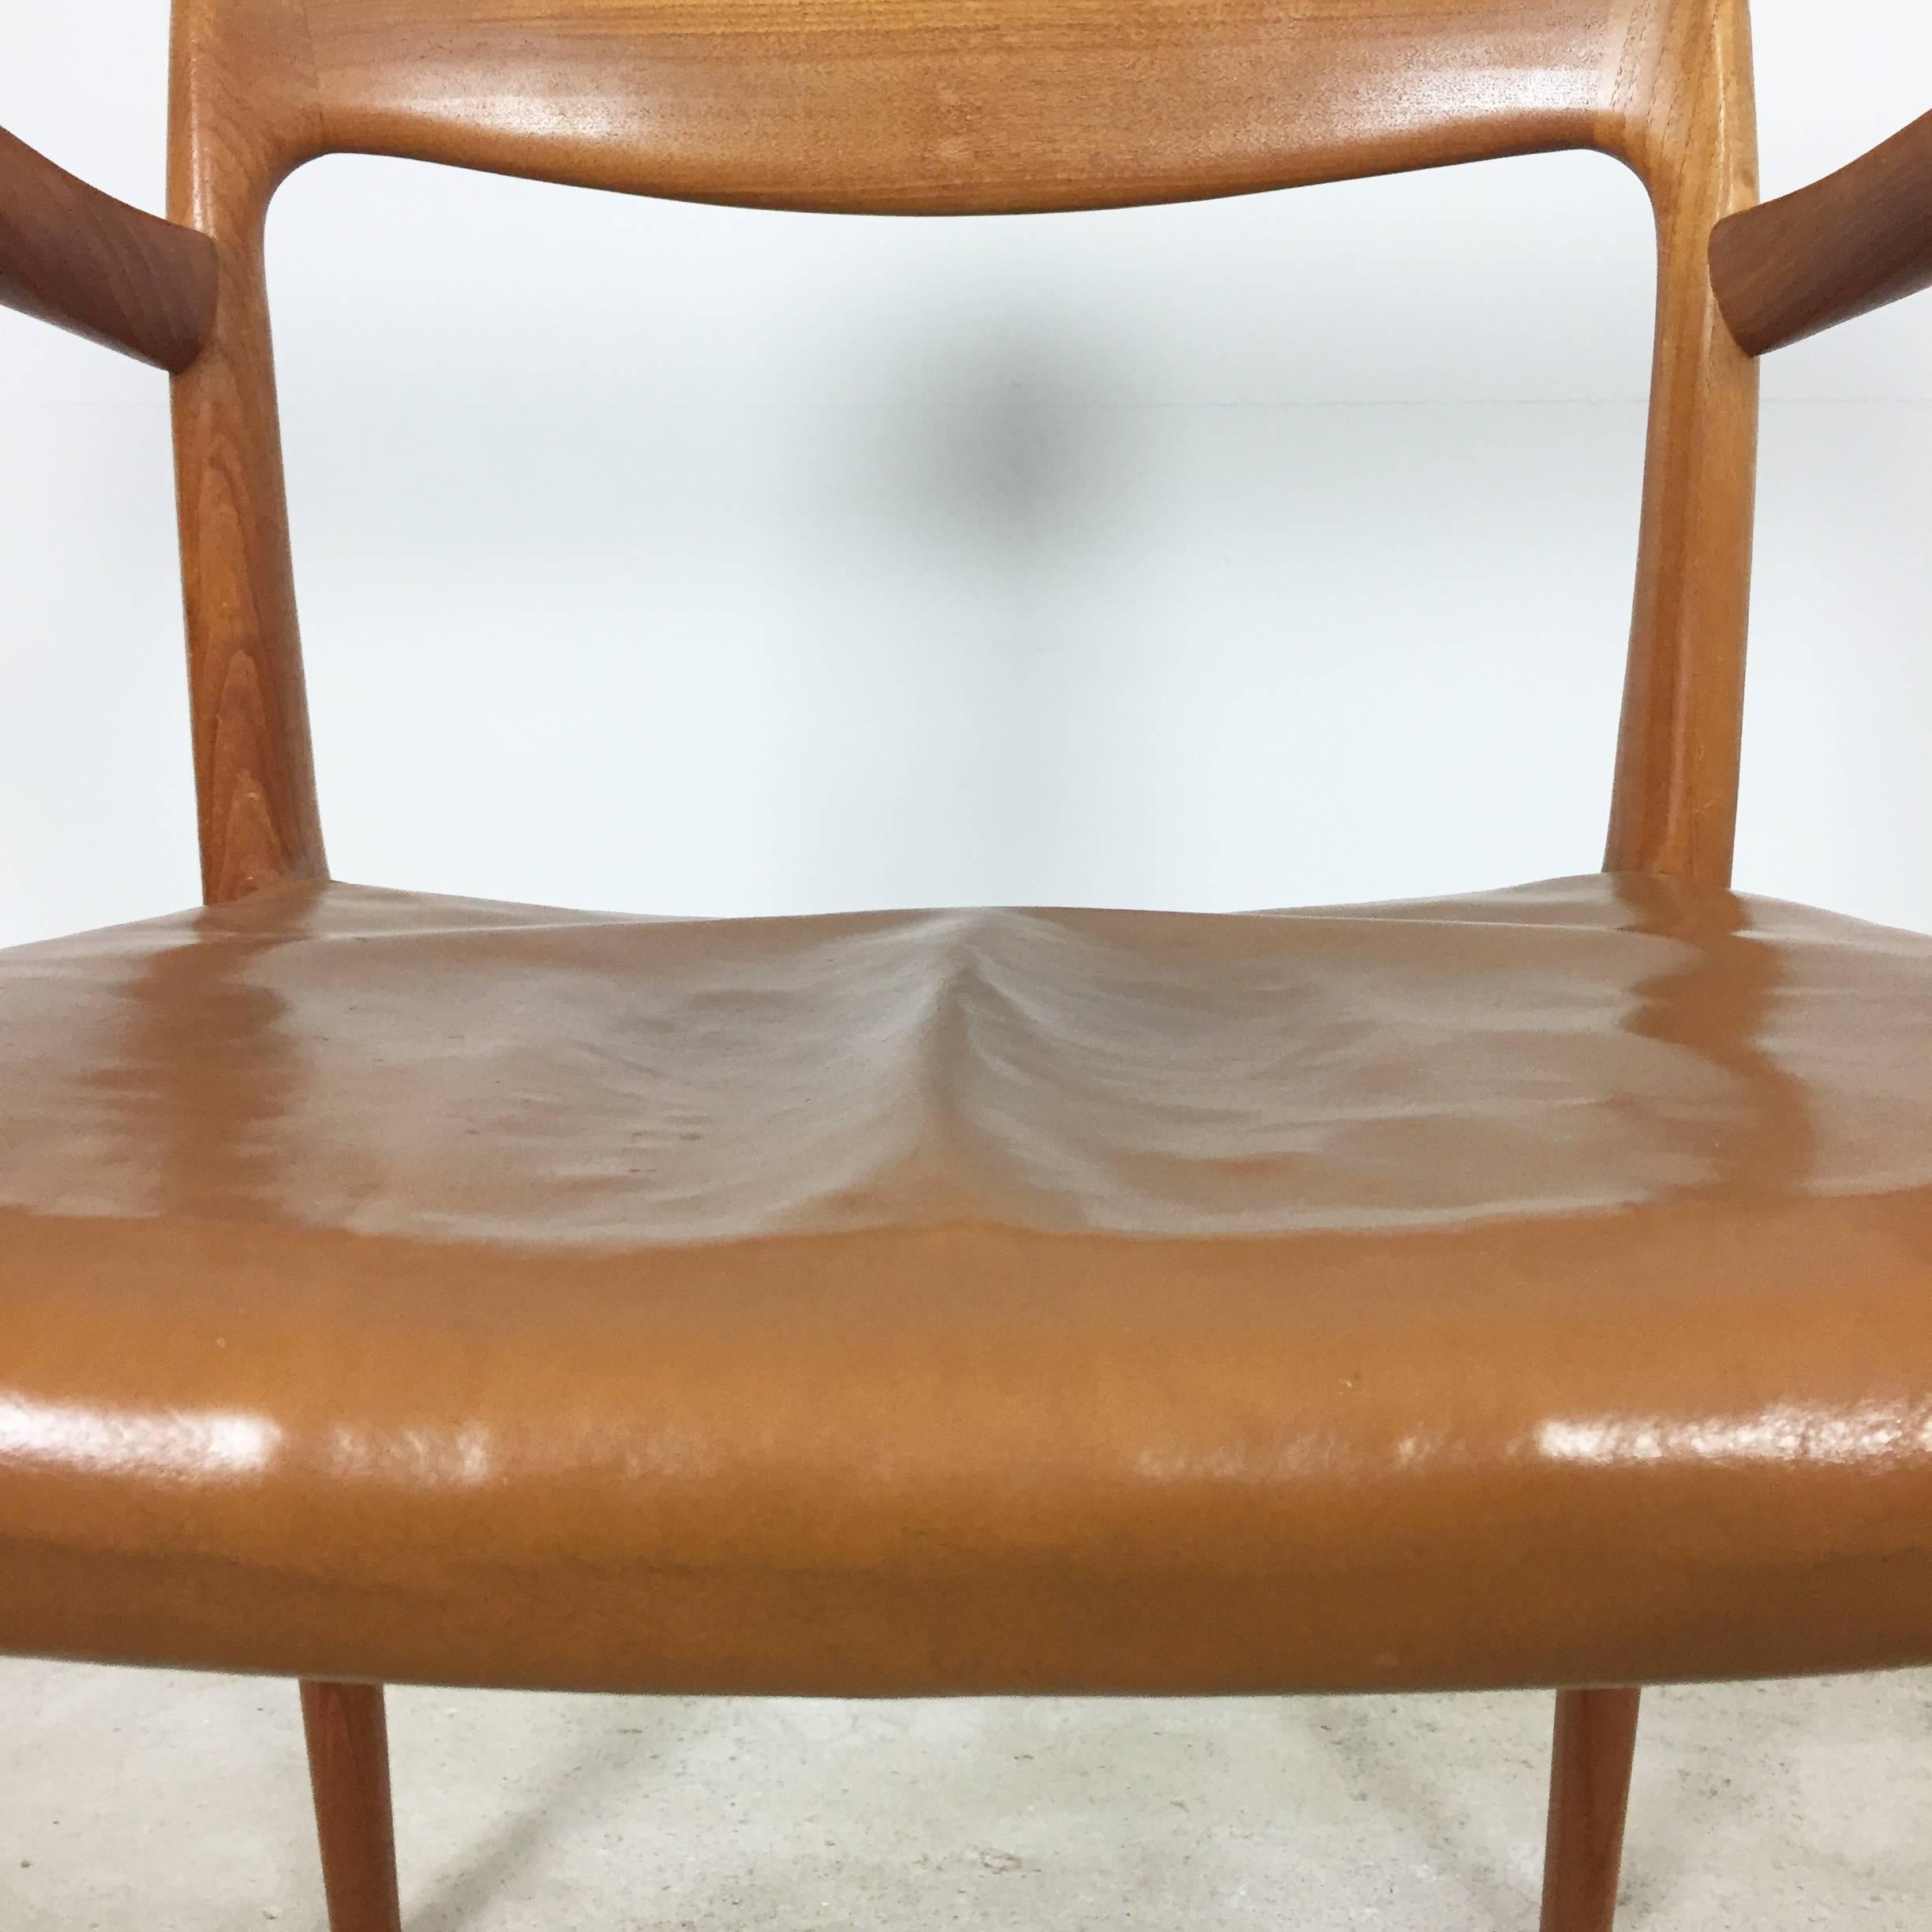 1960s Teak Armchair Model 77 with Original Leather Seat Niels O. Möller, Denmark In Good Condition For Sale In Kirchlengern, DE